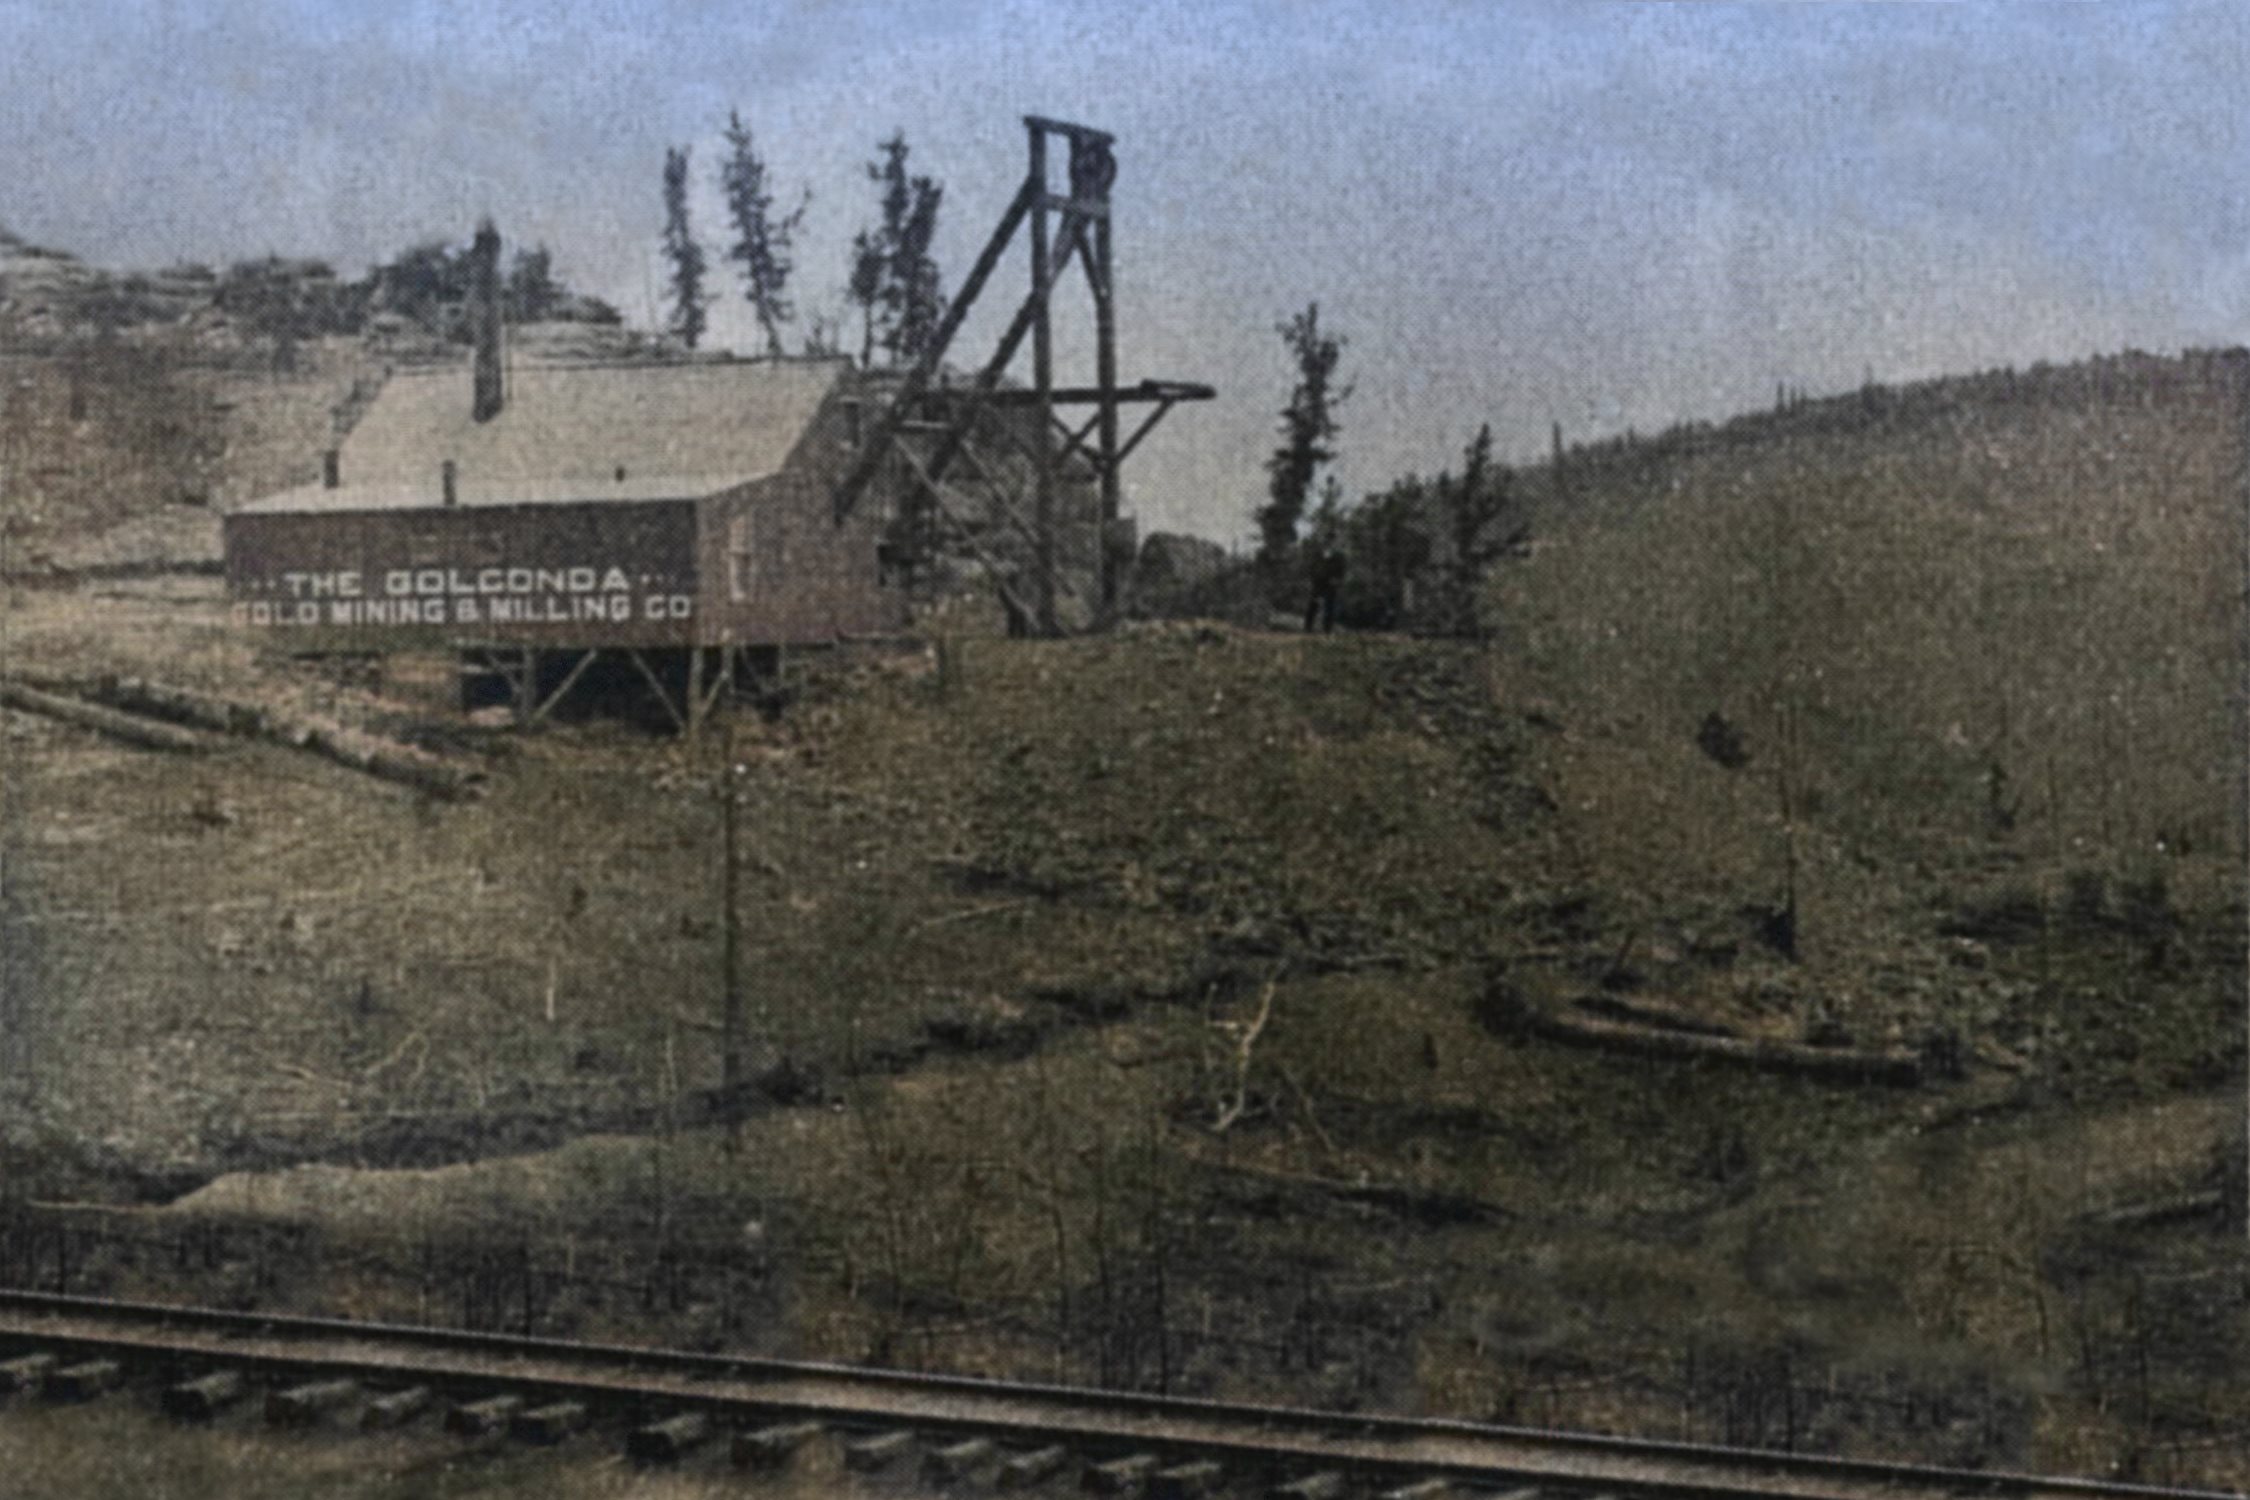 Sadly not a quality great view, but still a great view as it is a rare view from the trackside of the F. & C. C. mainline at the Golconda Mine Shaft no.1 operation on Squaw Mountain! The source is a group photo so the image sort of lacks details here and there, and I cheated a little on the colored version where I copied the tracks to fill out missing info at the lower right and left.
   Victor town is located outside the view at left, making the direction of the view in a southeast looking direction, and it appears like they have dug a trench just below the dump and the track, as there is a darker line there that might be a drainage drench for some reason but is more likely a left over from the early exploration of this ground.
   This shaft was located at the southern end of the claim, and sometime after 1896 it was abandoned, and the main working shaft moved further up the hill for some unknow reason. The structure and the headframe here are of somewhat large size so the hope and idea of this mine was certainly at this time around 1895-1896 looking prosperous! Being this was so visible from the train it is among those I need to try make a 3D model of some day!
   I did procure the colored version of this image as I think it is nicer. Source is gray-toned, or in common speech black & white. Used an online service and tweaked and worked with image to get what looks best to my eyes for the moment.